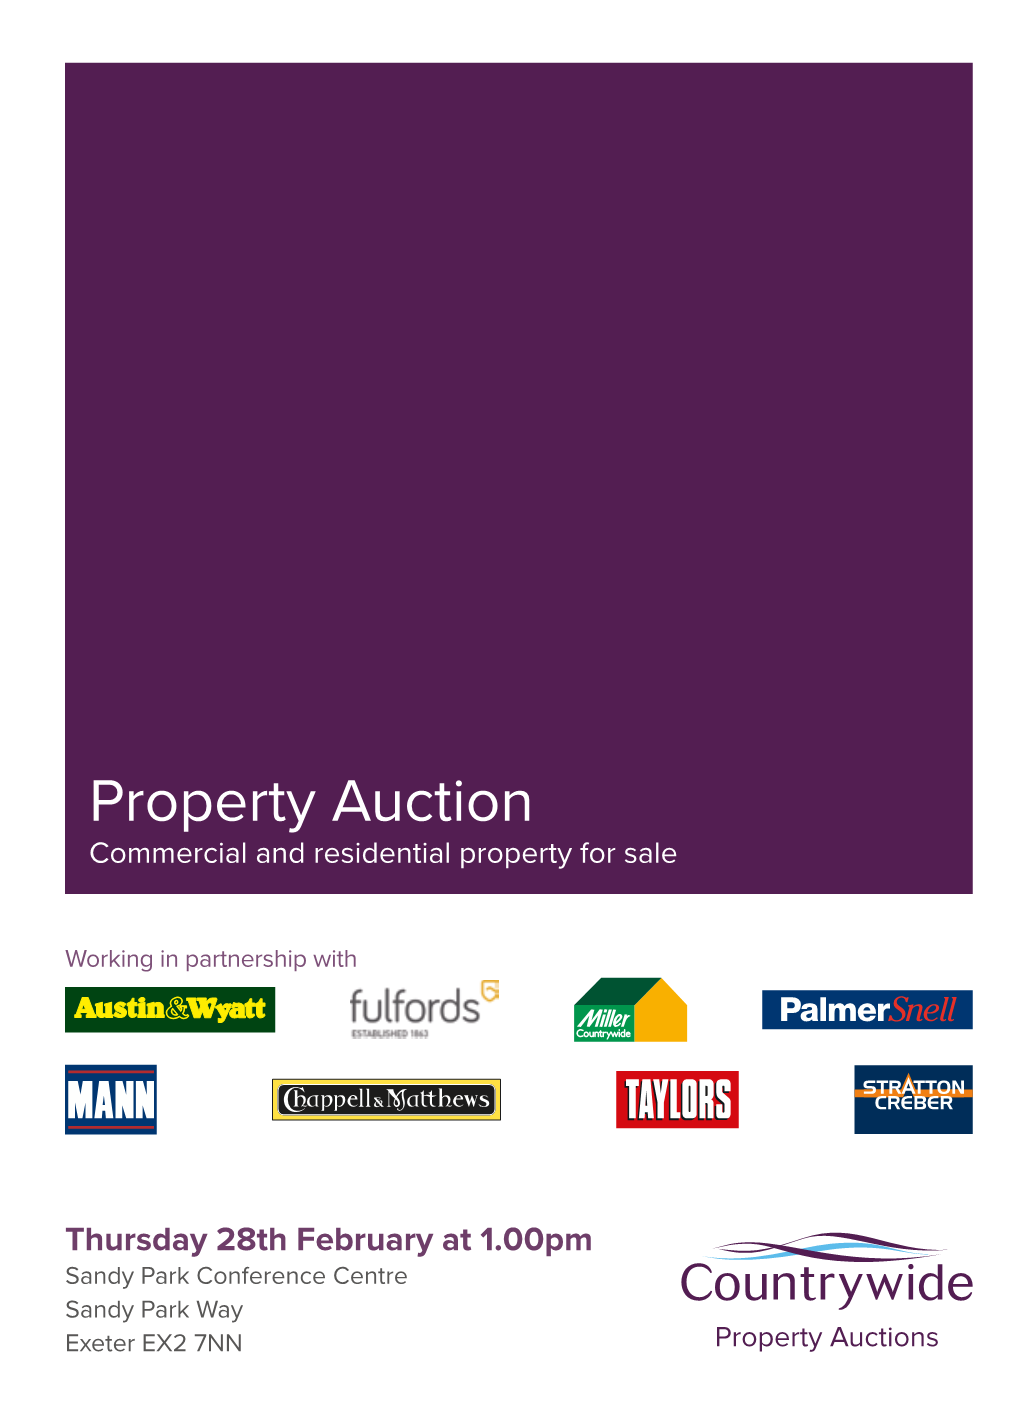 Property Auctions South West